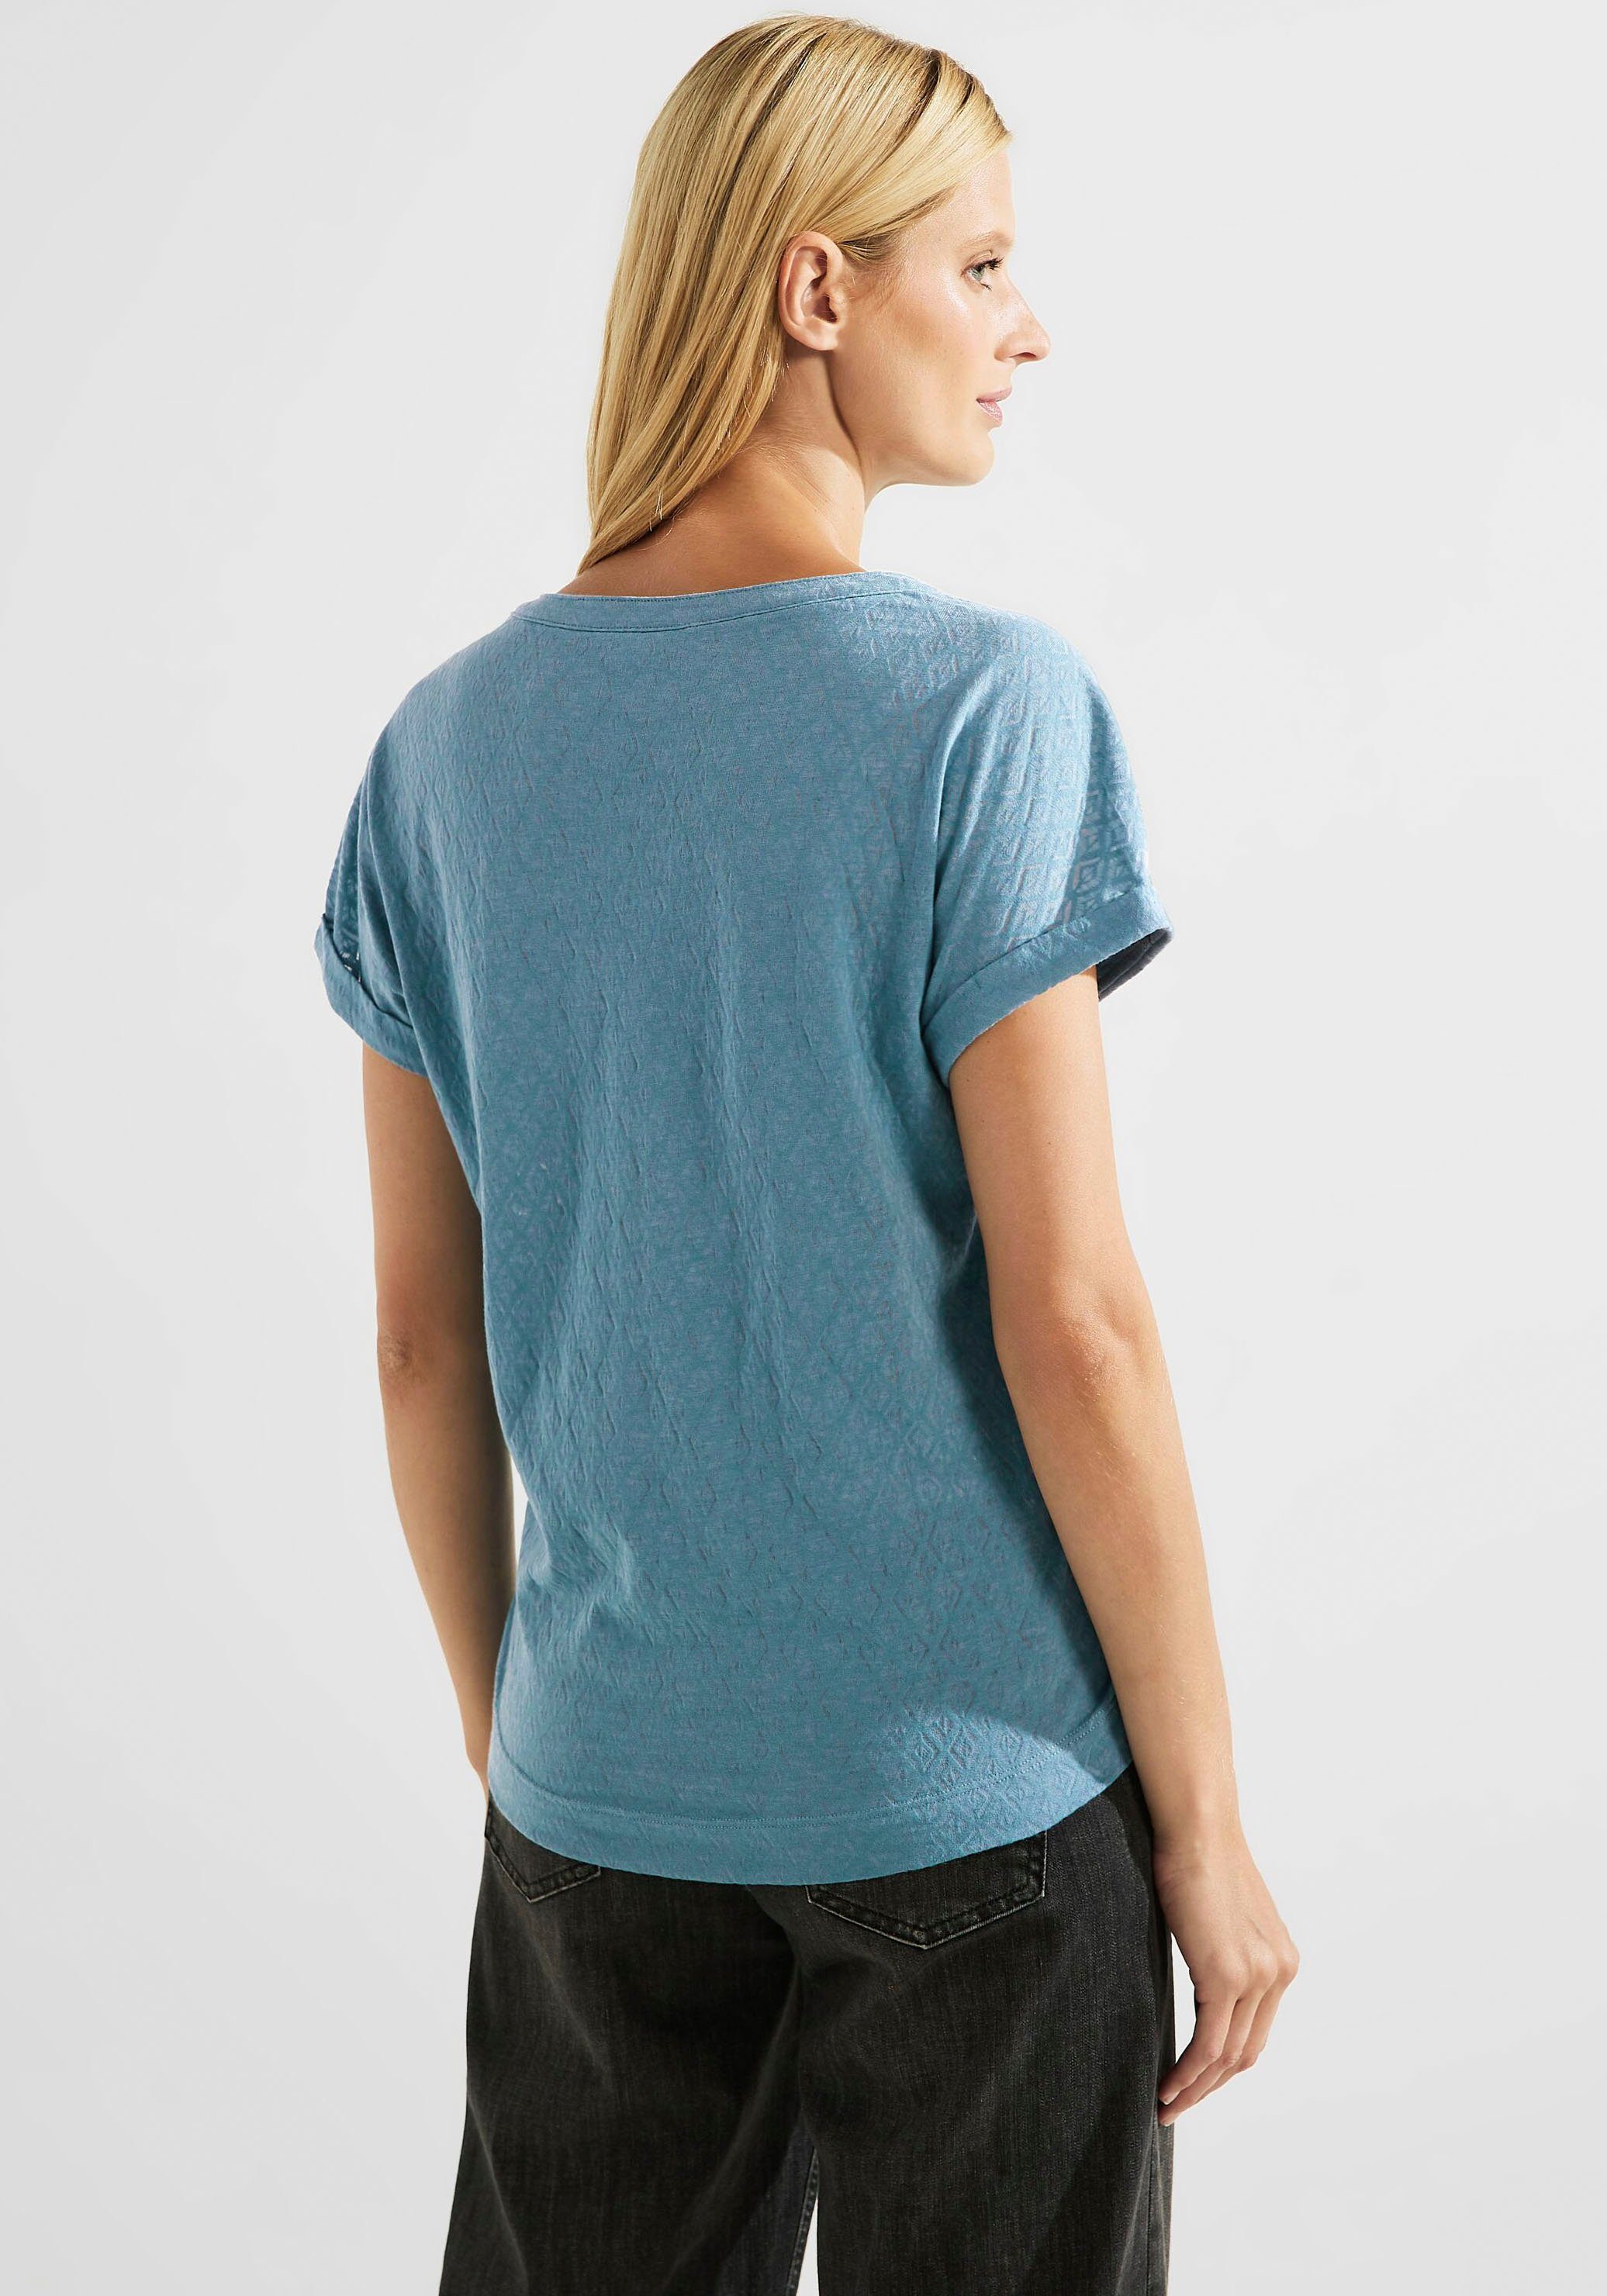 in T-Shirt Rhombusform adriatic blue Allover-Muster mit Cecil